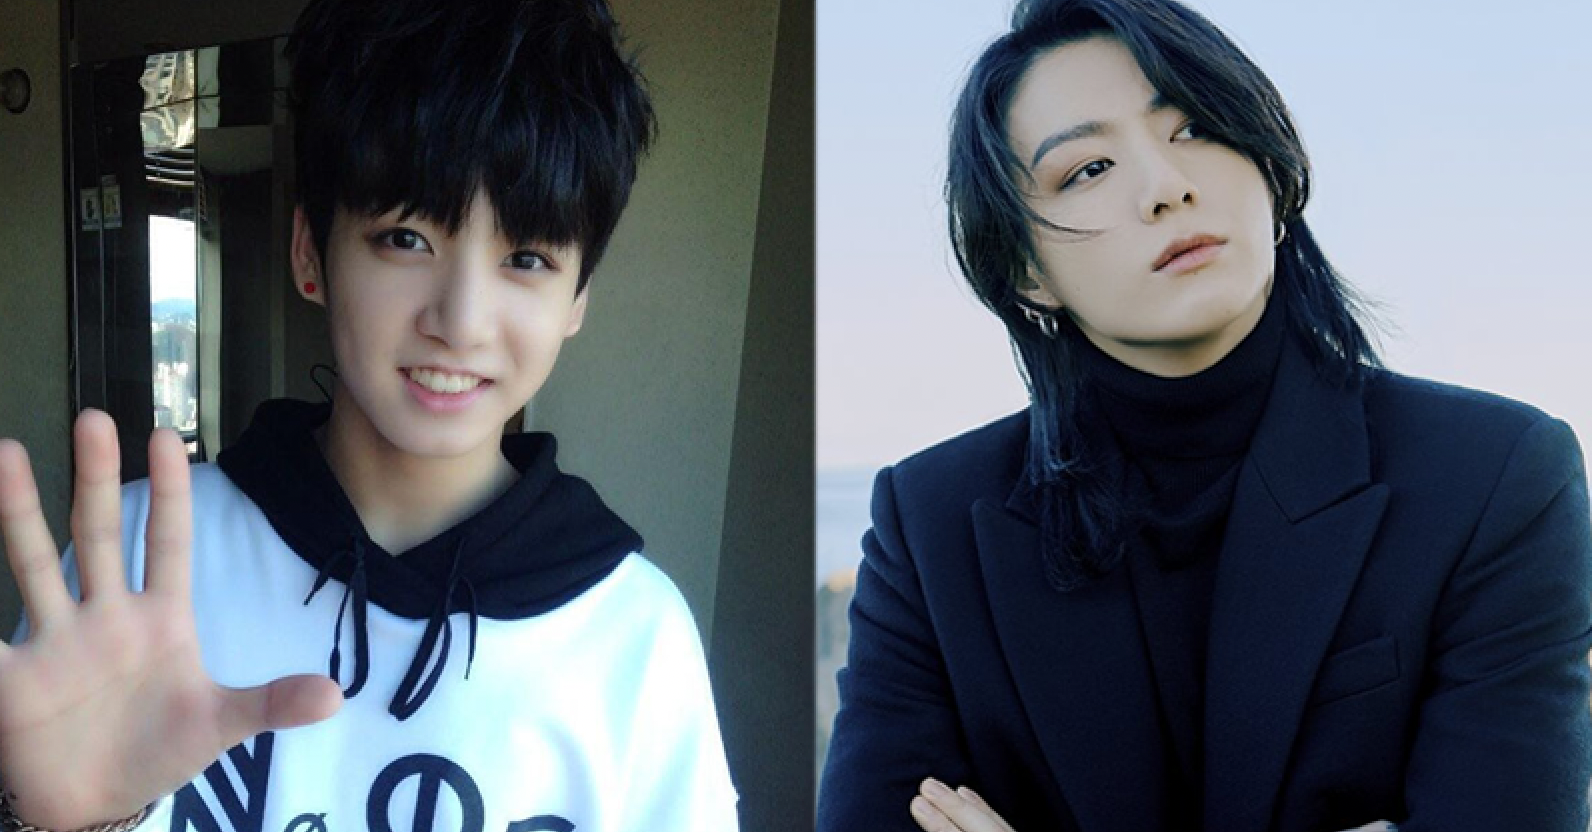 Throwback To BTS Jungkook’s Early Debut Photos, Netizens Wonder How Bang Si Hyuk Let Jungkook Debut At Such A Young Age